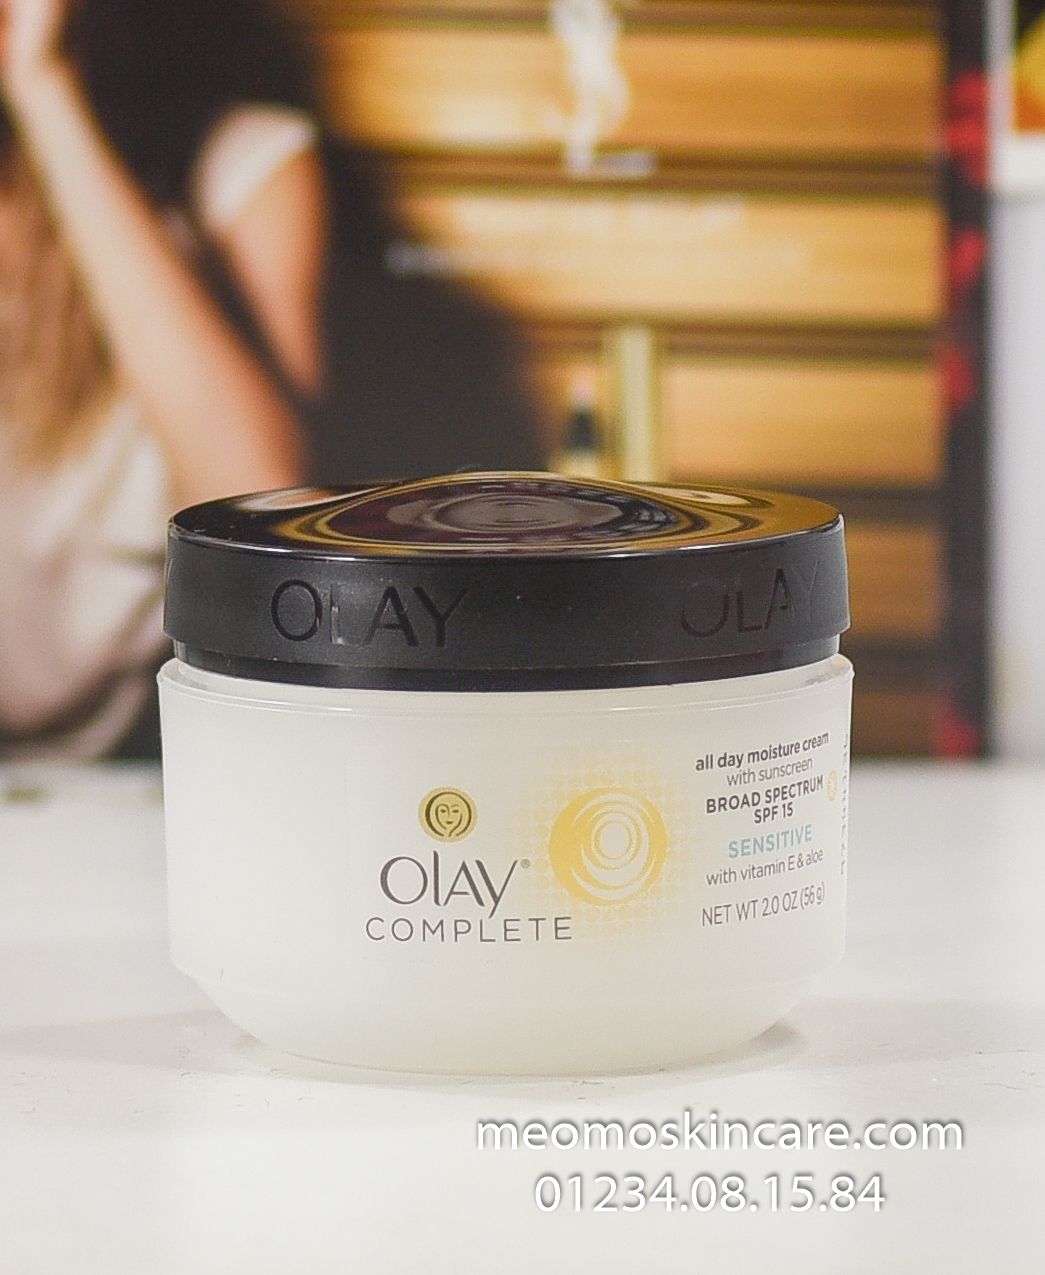 Olay Complete All Day Moisture Face Cream with Sunscreen spf 15, Sensitive Skin